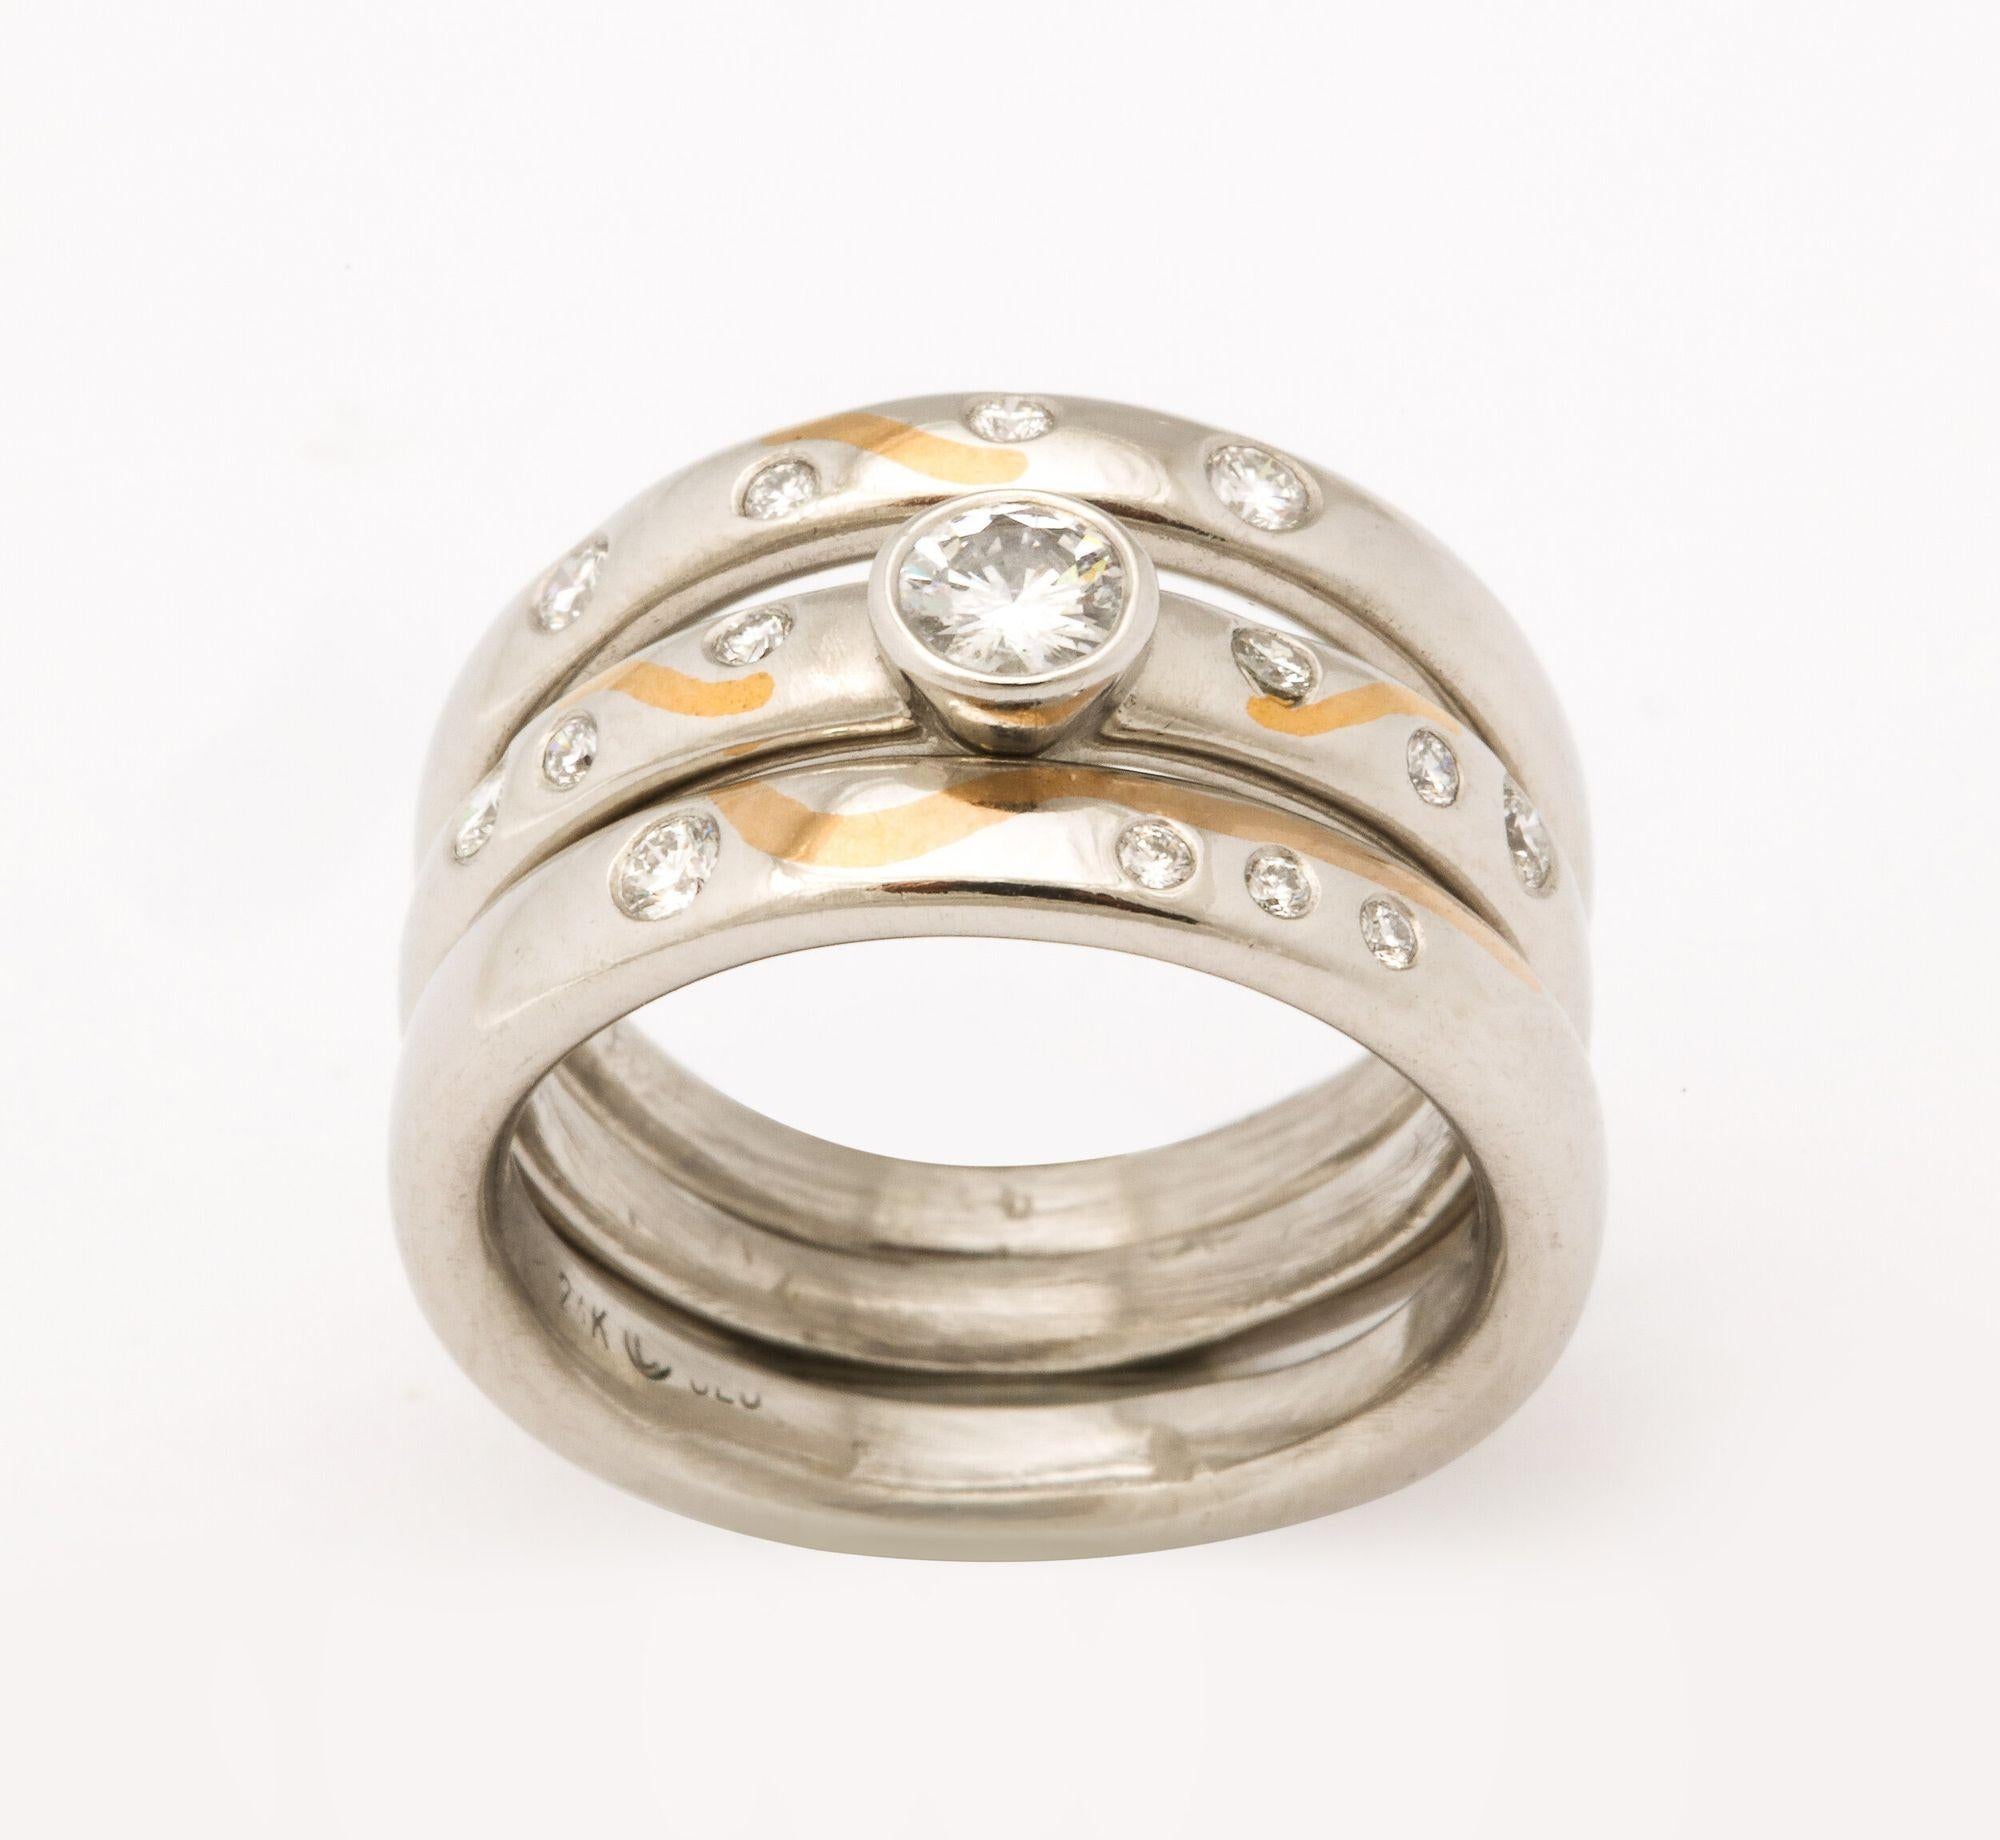 Three interesting stacking rings each with diamonds interspersed and one with a single diamond.
They are sold as a set and can be sized to fit.